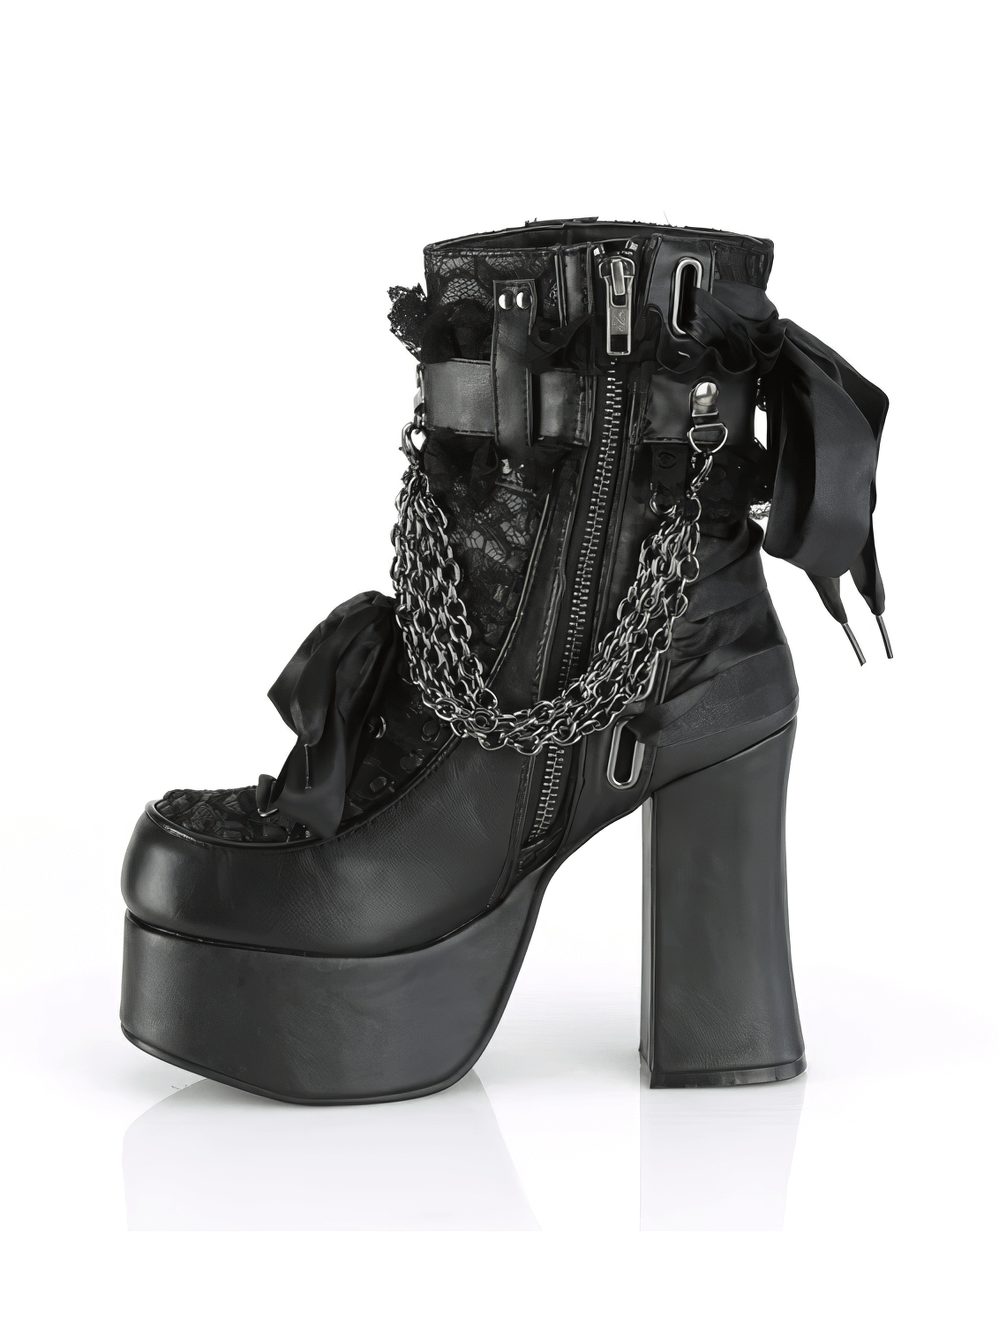 DEMONIA Black Lace Ankle Boots with Chain and Ribbon Detail